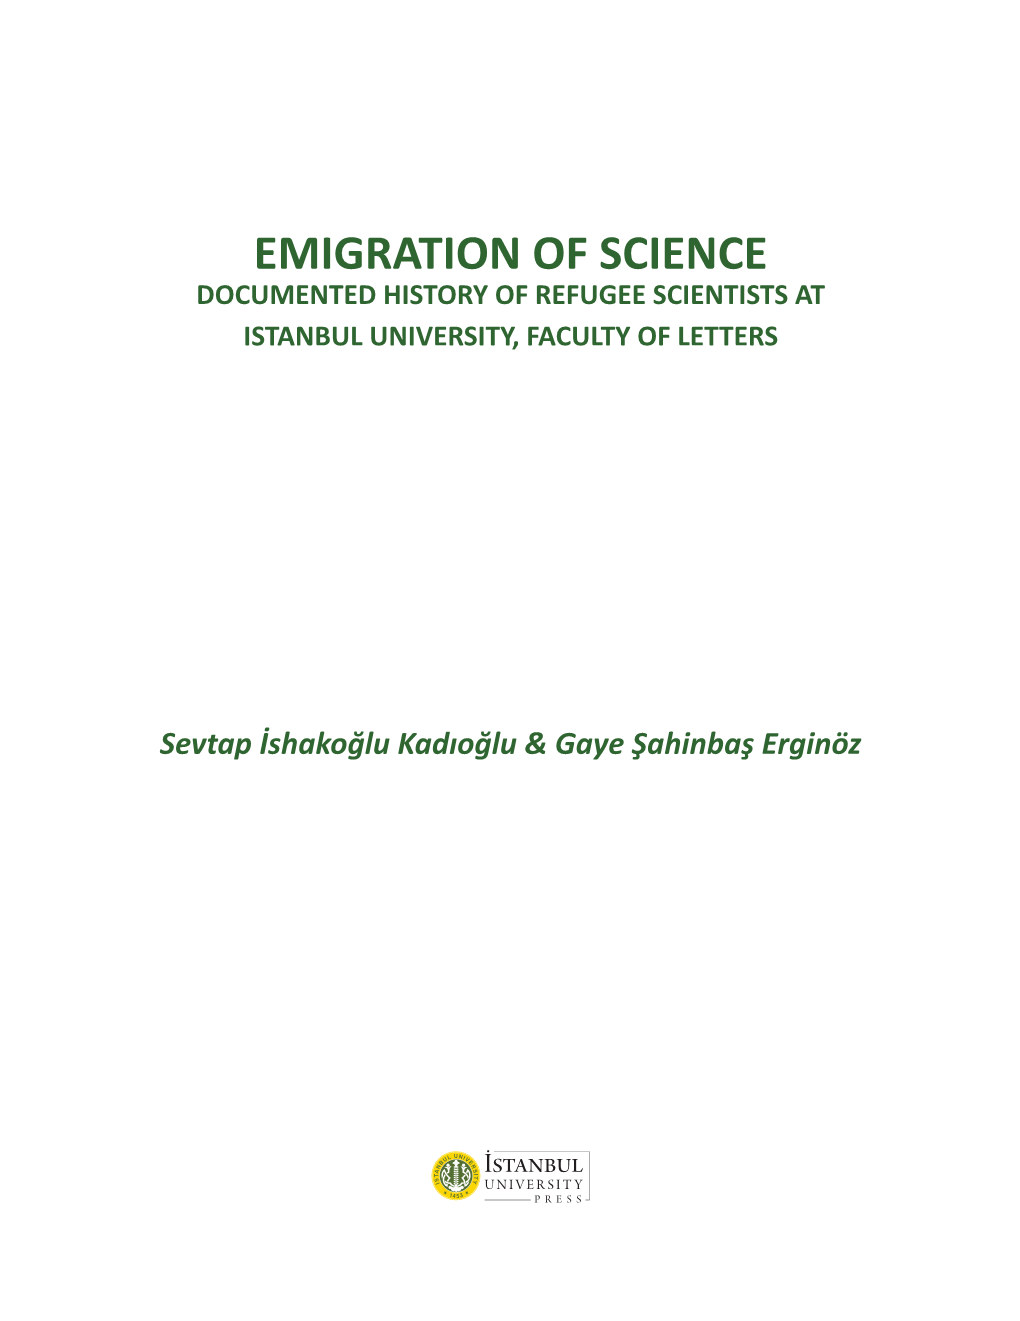 Emigration of Science Documented History of Refugee Scientists at Istanbul University, Faculty of Letters